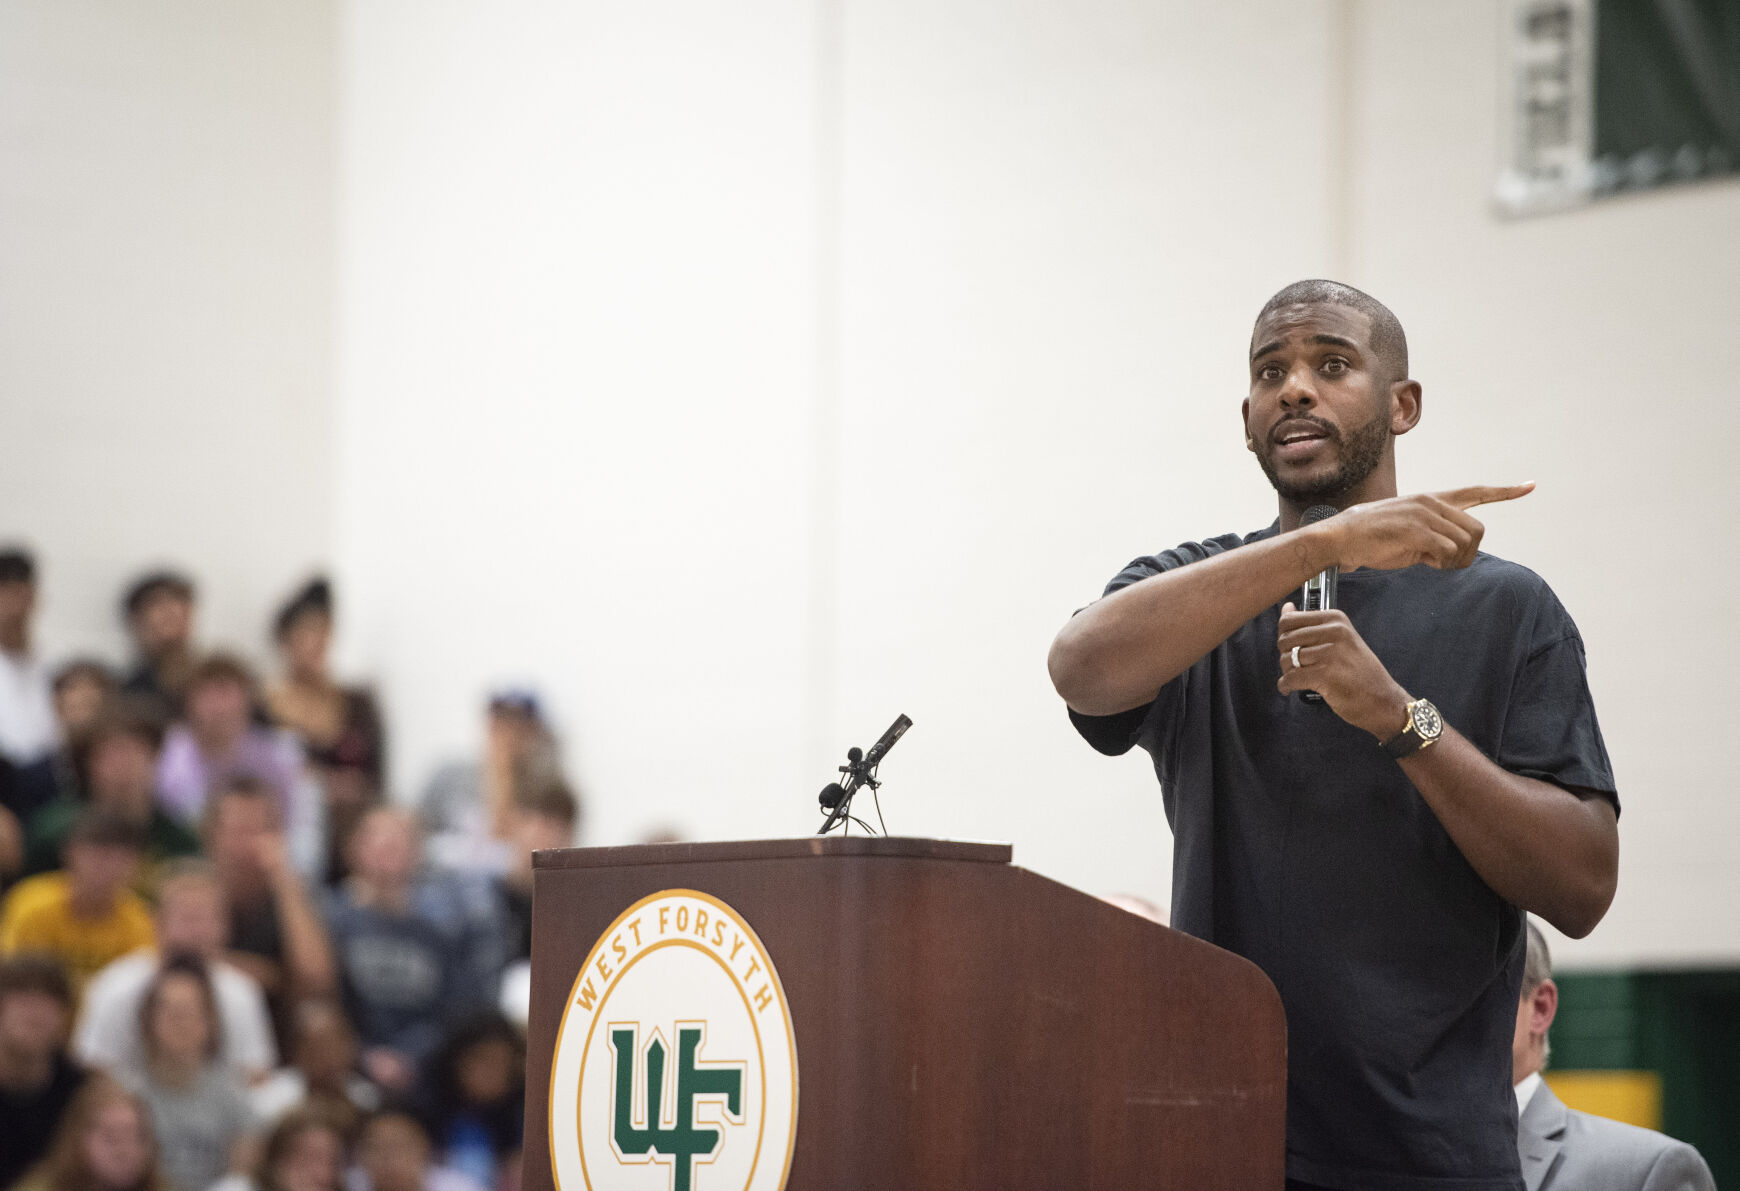 West Forsyth announces inaugural Sports Hall of Fame class that includes NBA star Chris Paul